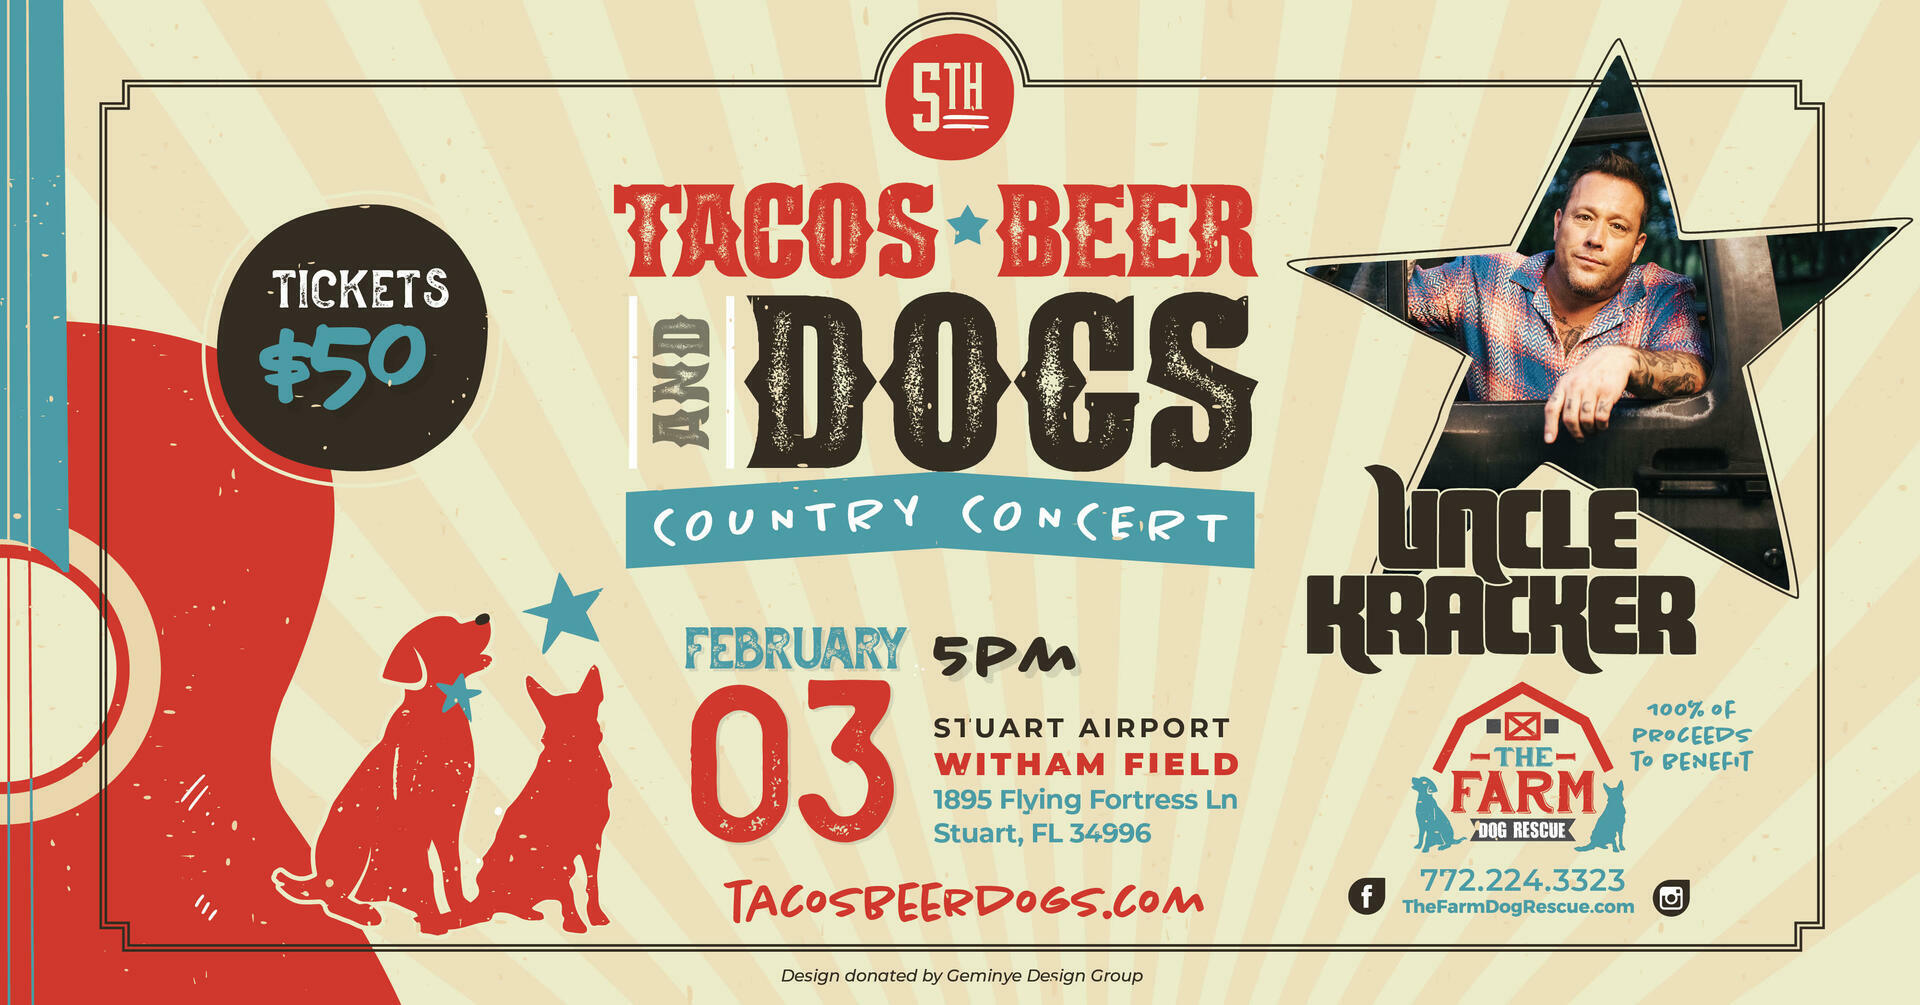 UNCLE KRACKER FEB 3 STUART - TACO'S BEER AND DOGS COUNTRY CONCERT, Stuart, Florida, United States